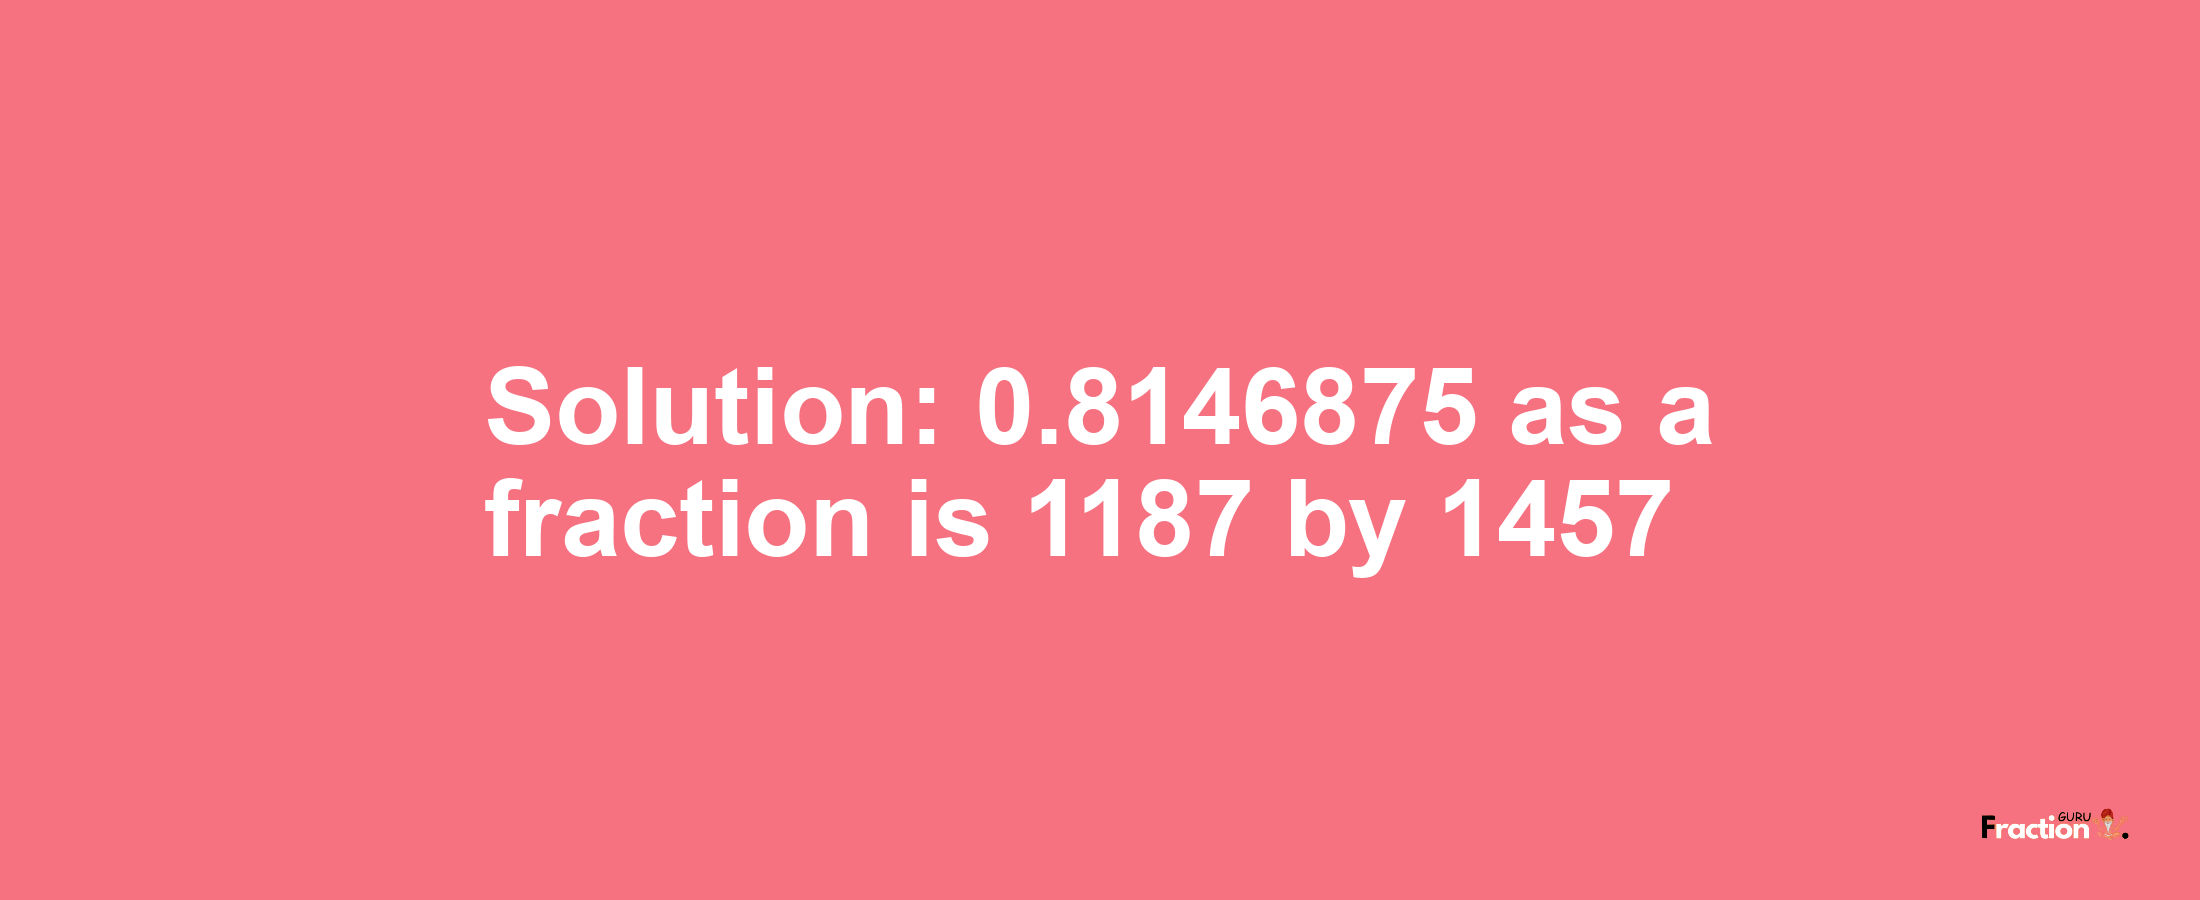 Solution:0.8146875 as a fraction is 1187/1457